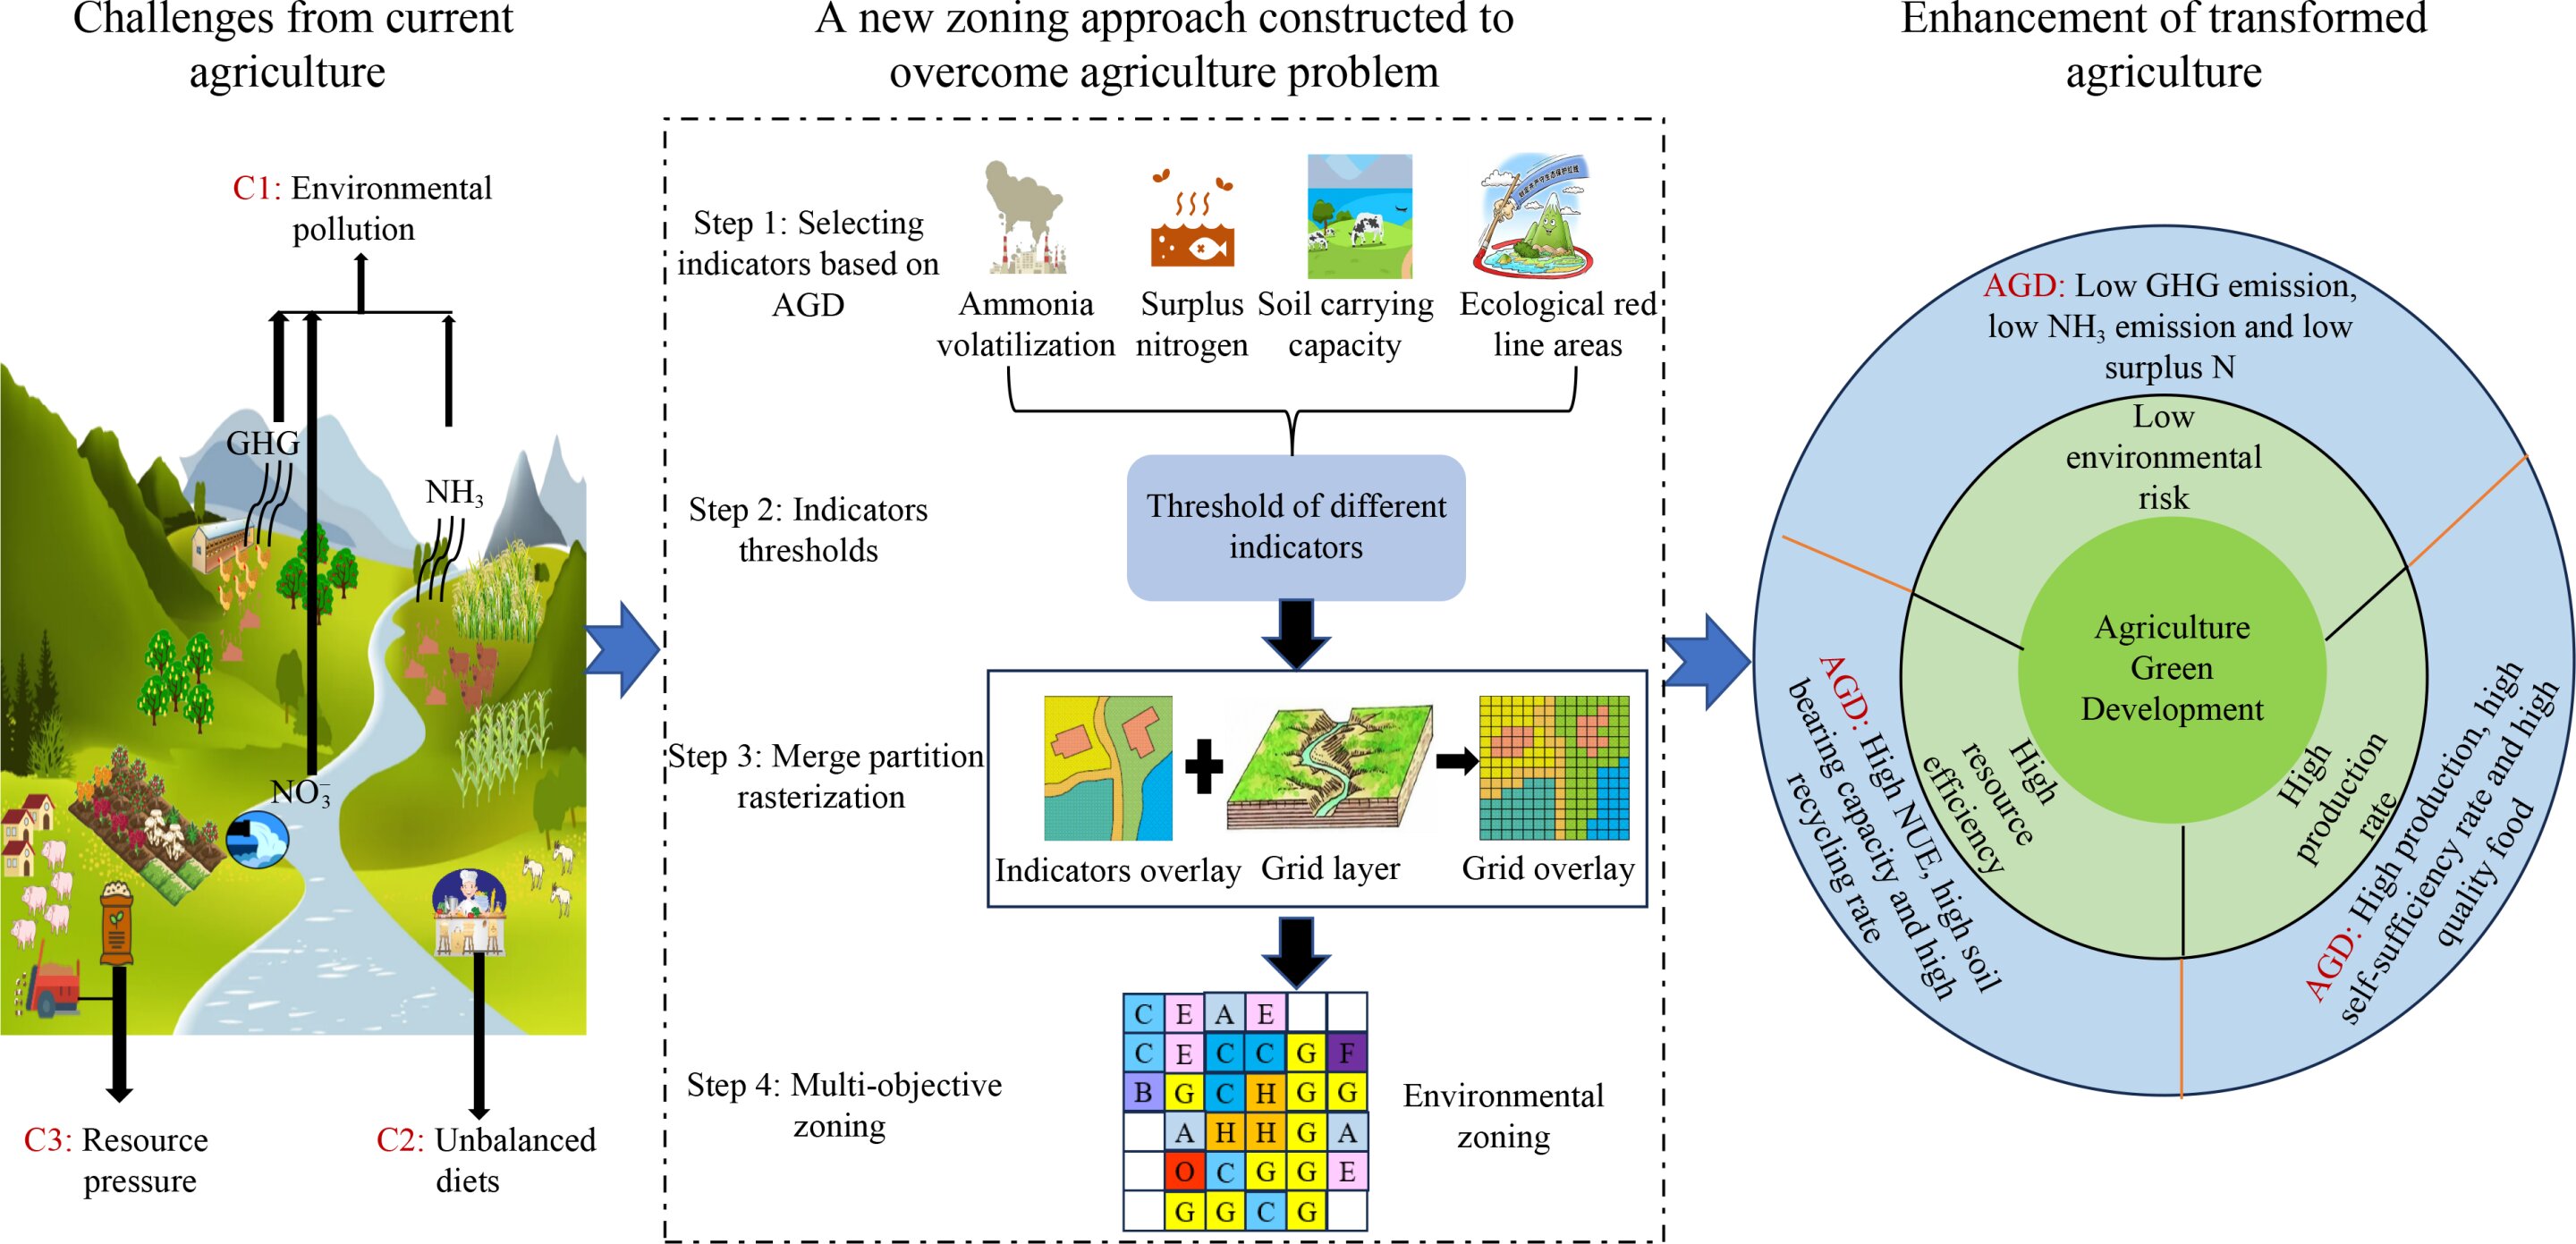 How do crop–livestock systems switch to agricultural green development in the Baiyangdian Basin?